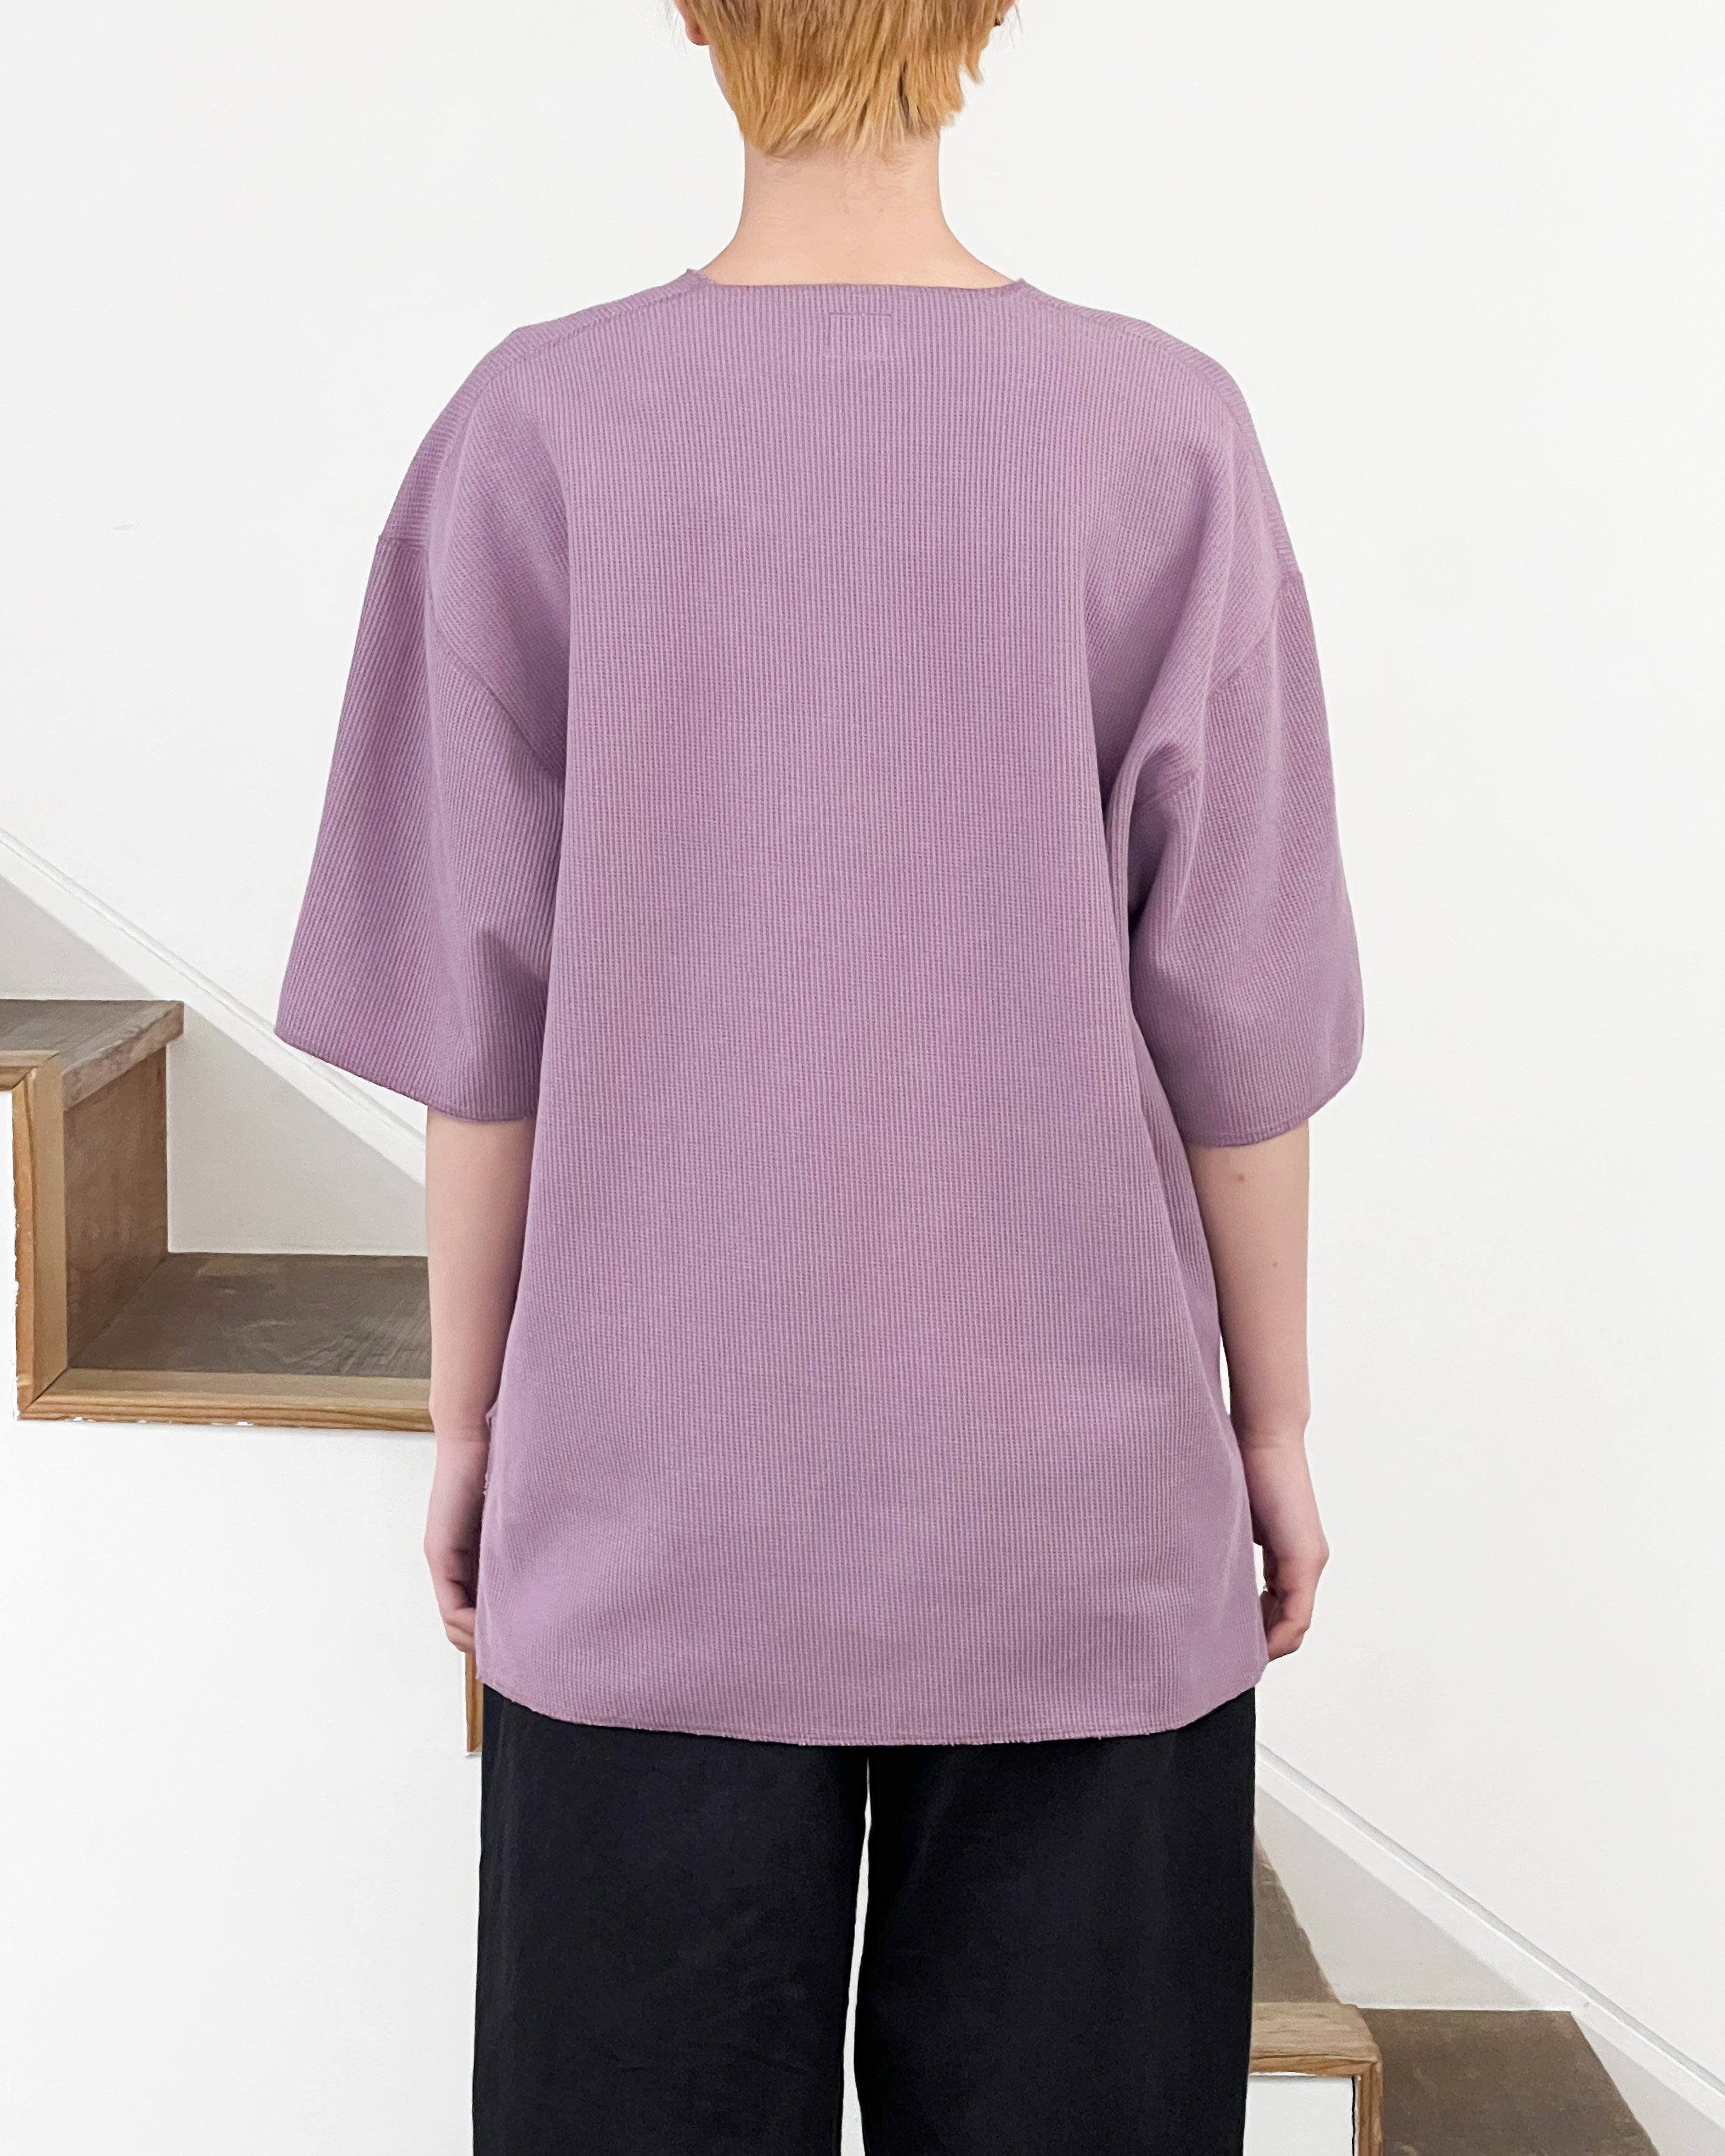 【blurhms ROOTSTOCK】ROUGH&SMOOTH THERMAL OVER-NECK - PURPLE GREY